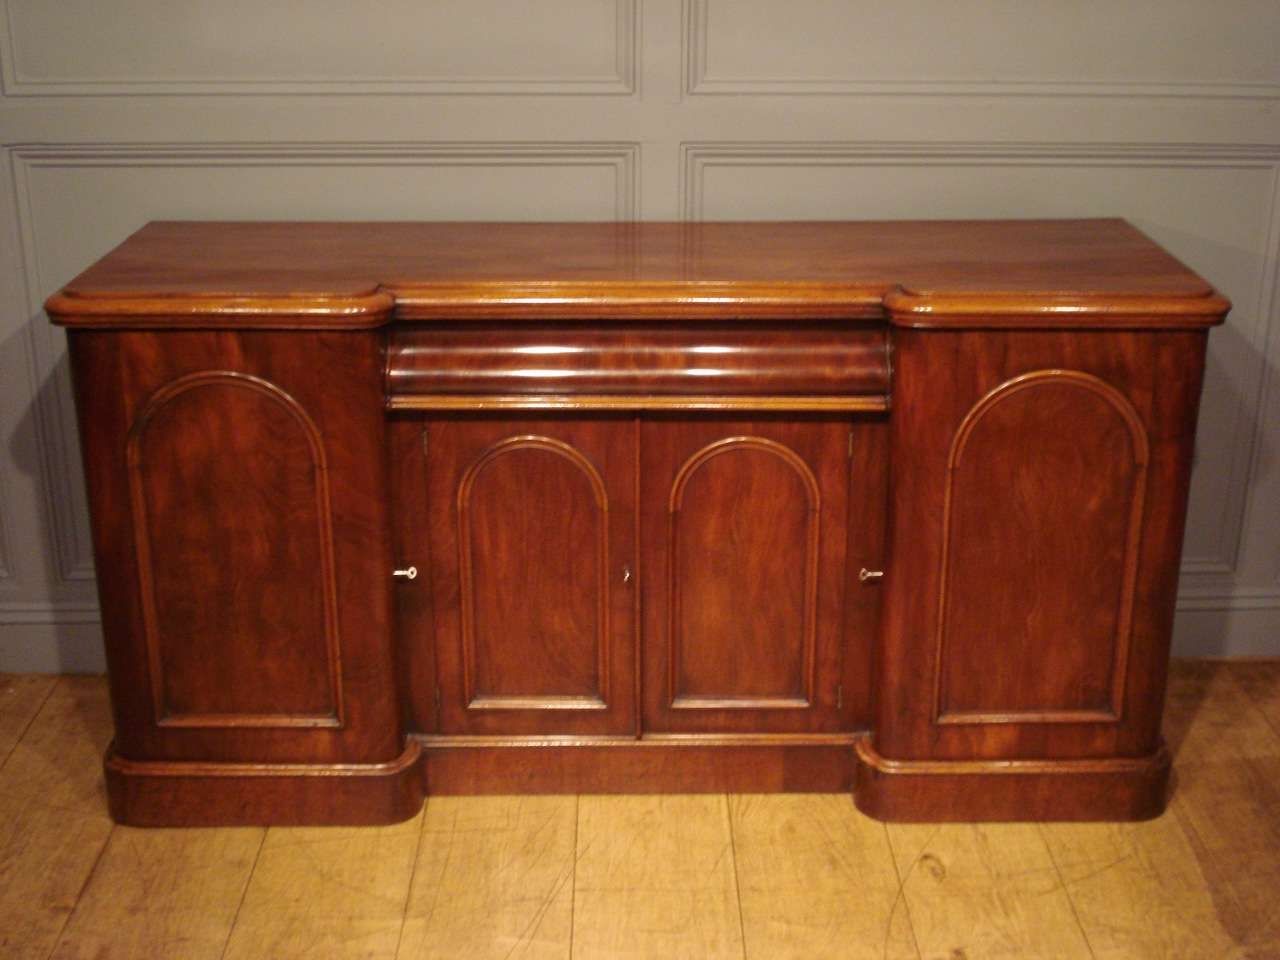 Sold/mid 19th Century Mahogany Sideboard – Antique Sideboards Pertaining To Mahogany Sideboards (View 7 of 20)